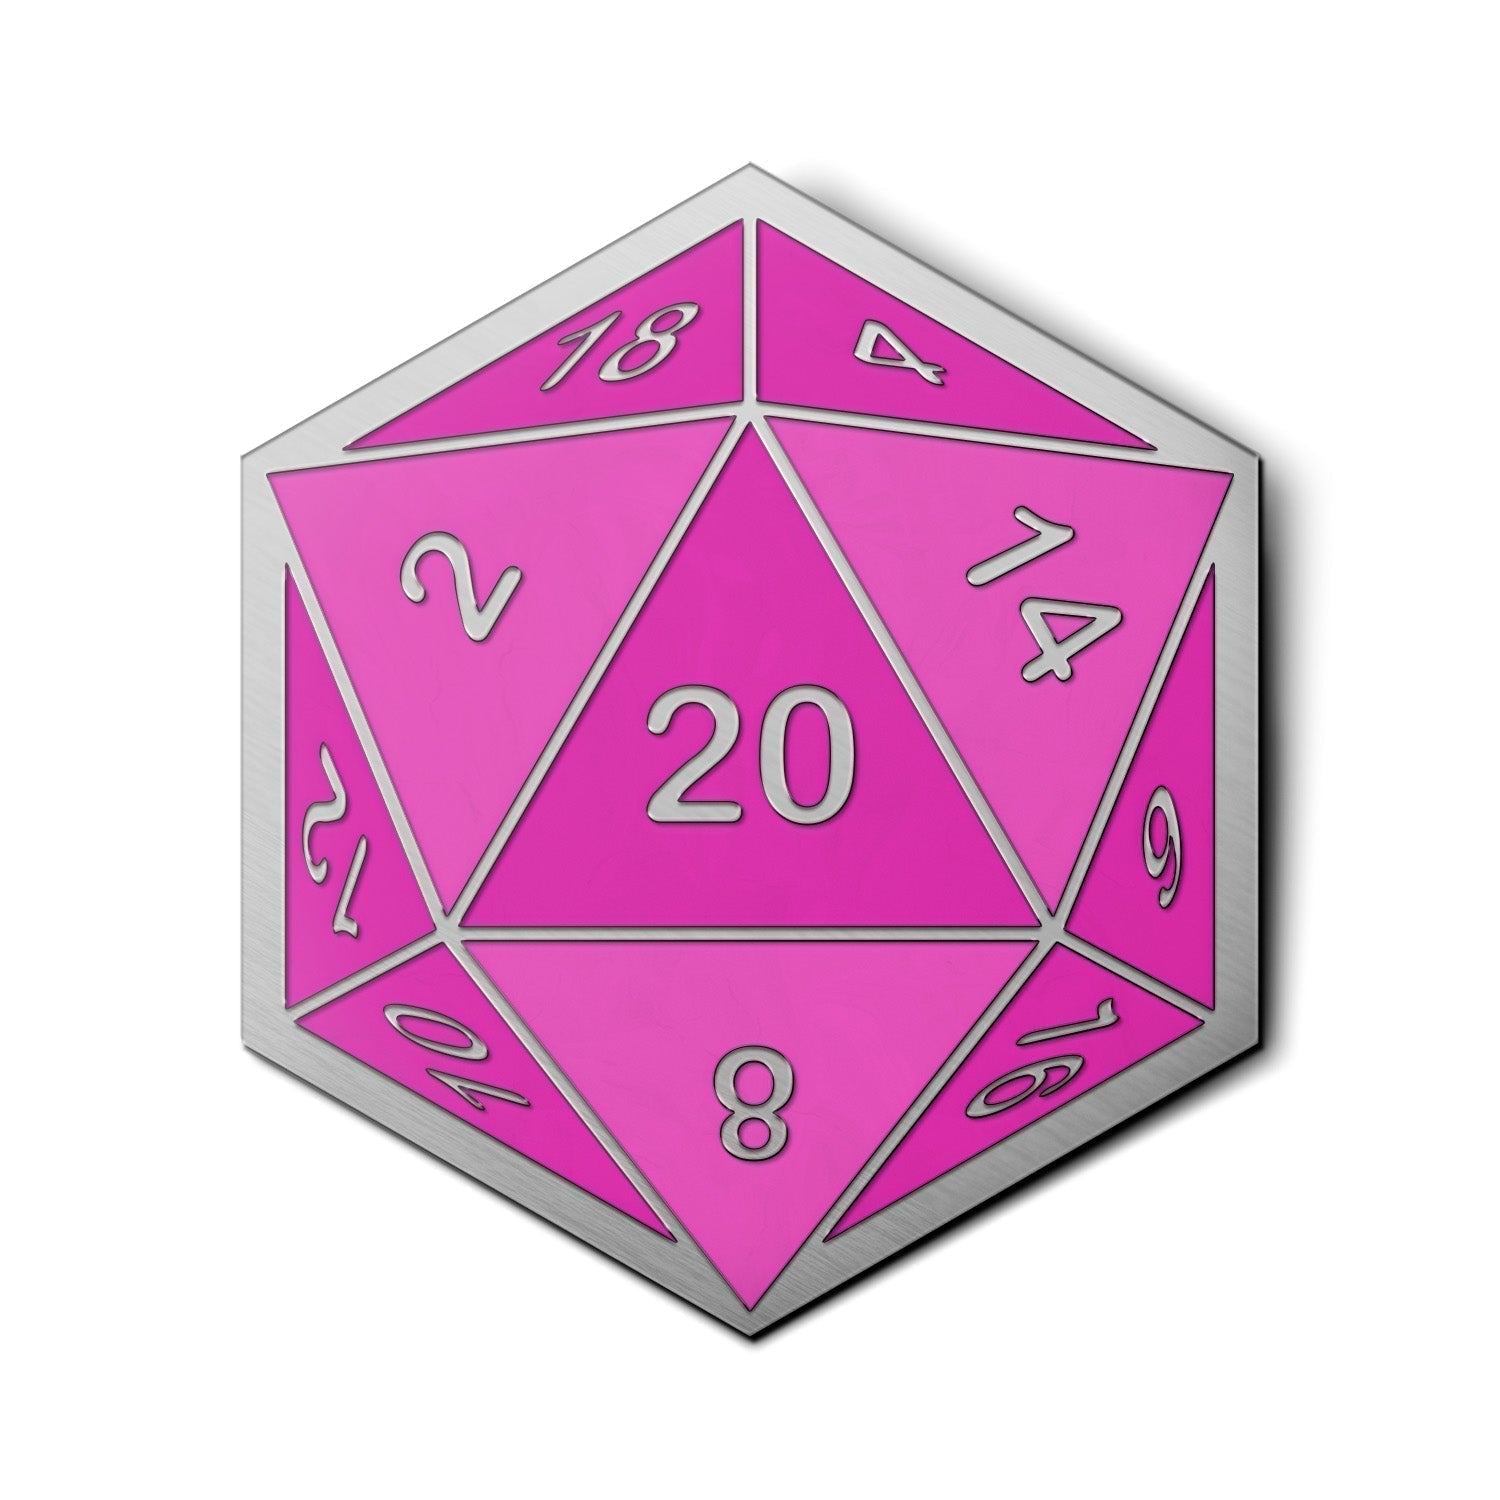 D20 Dice Die - Hard Enamel Adventure Dice Pin Metal by Norse Foundry - NOR 03679_Parent